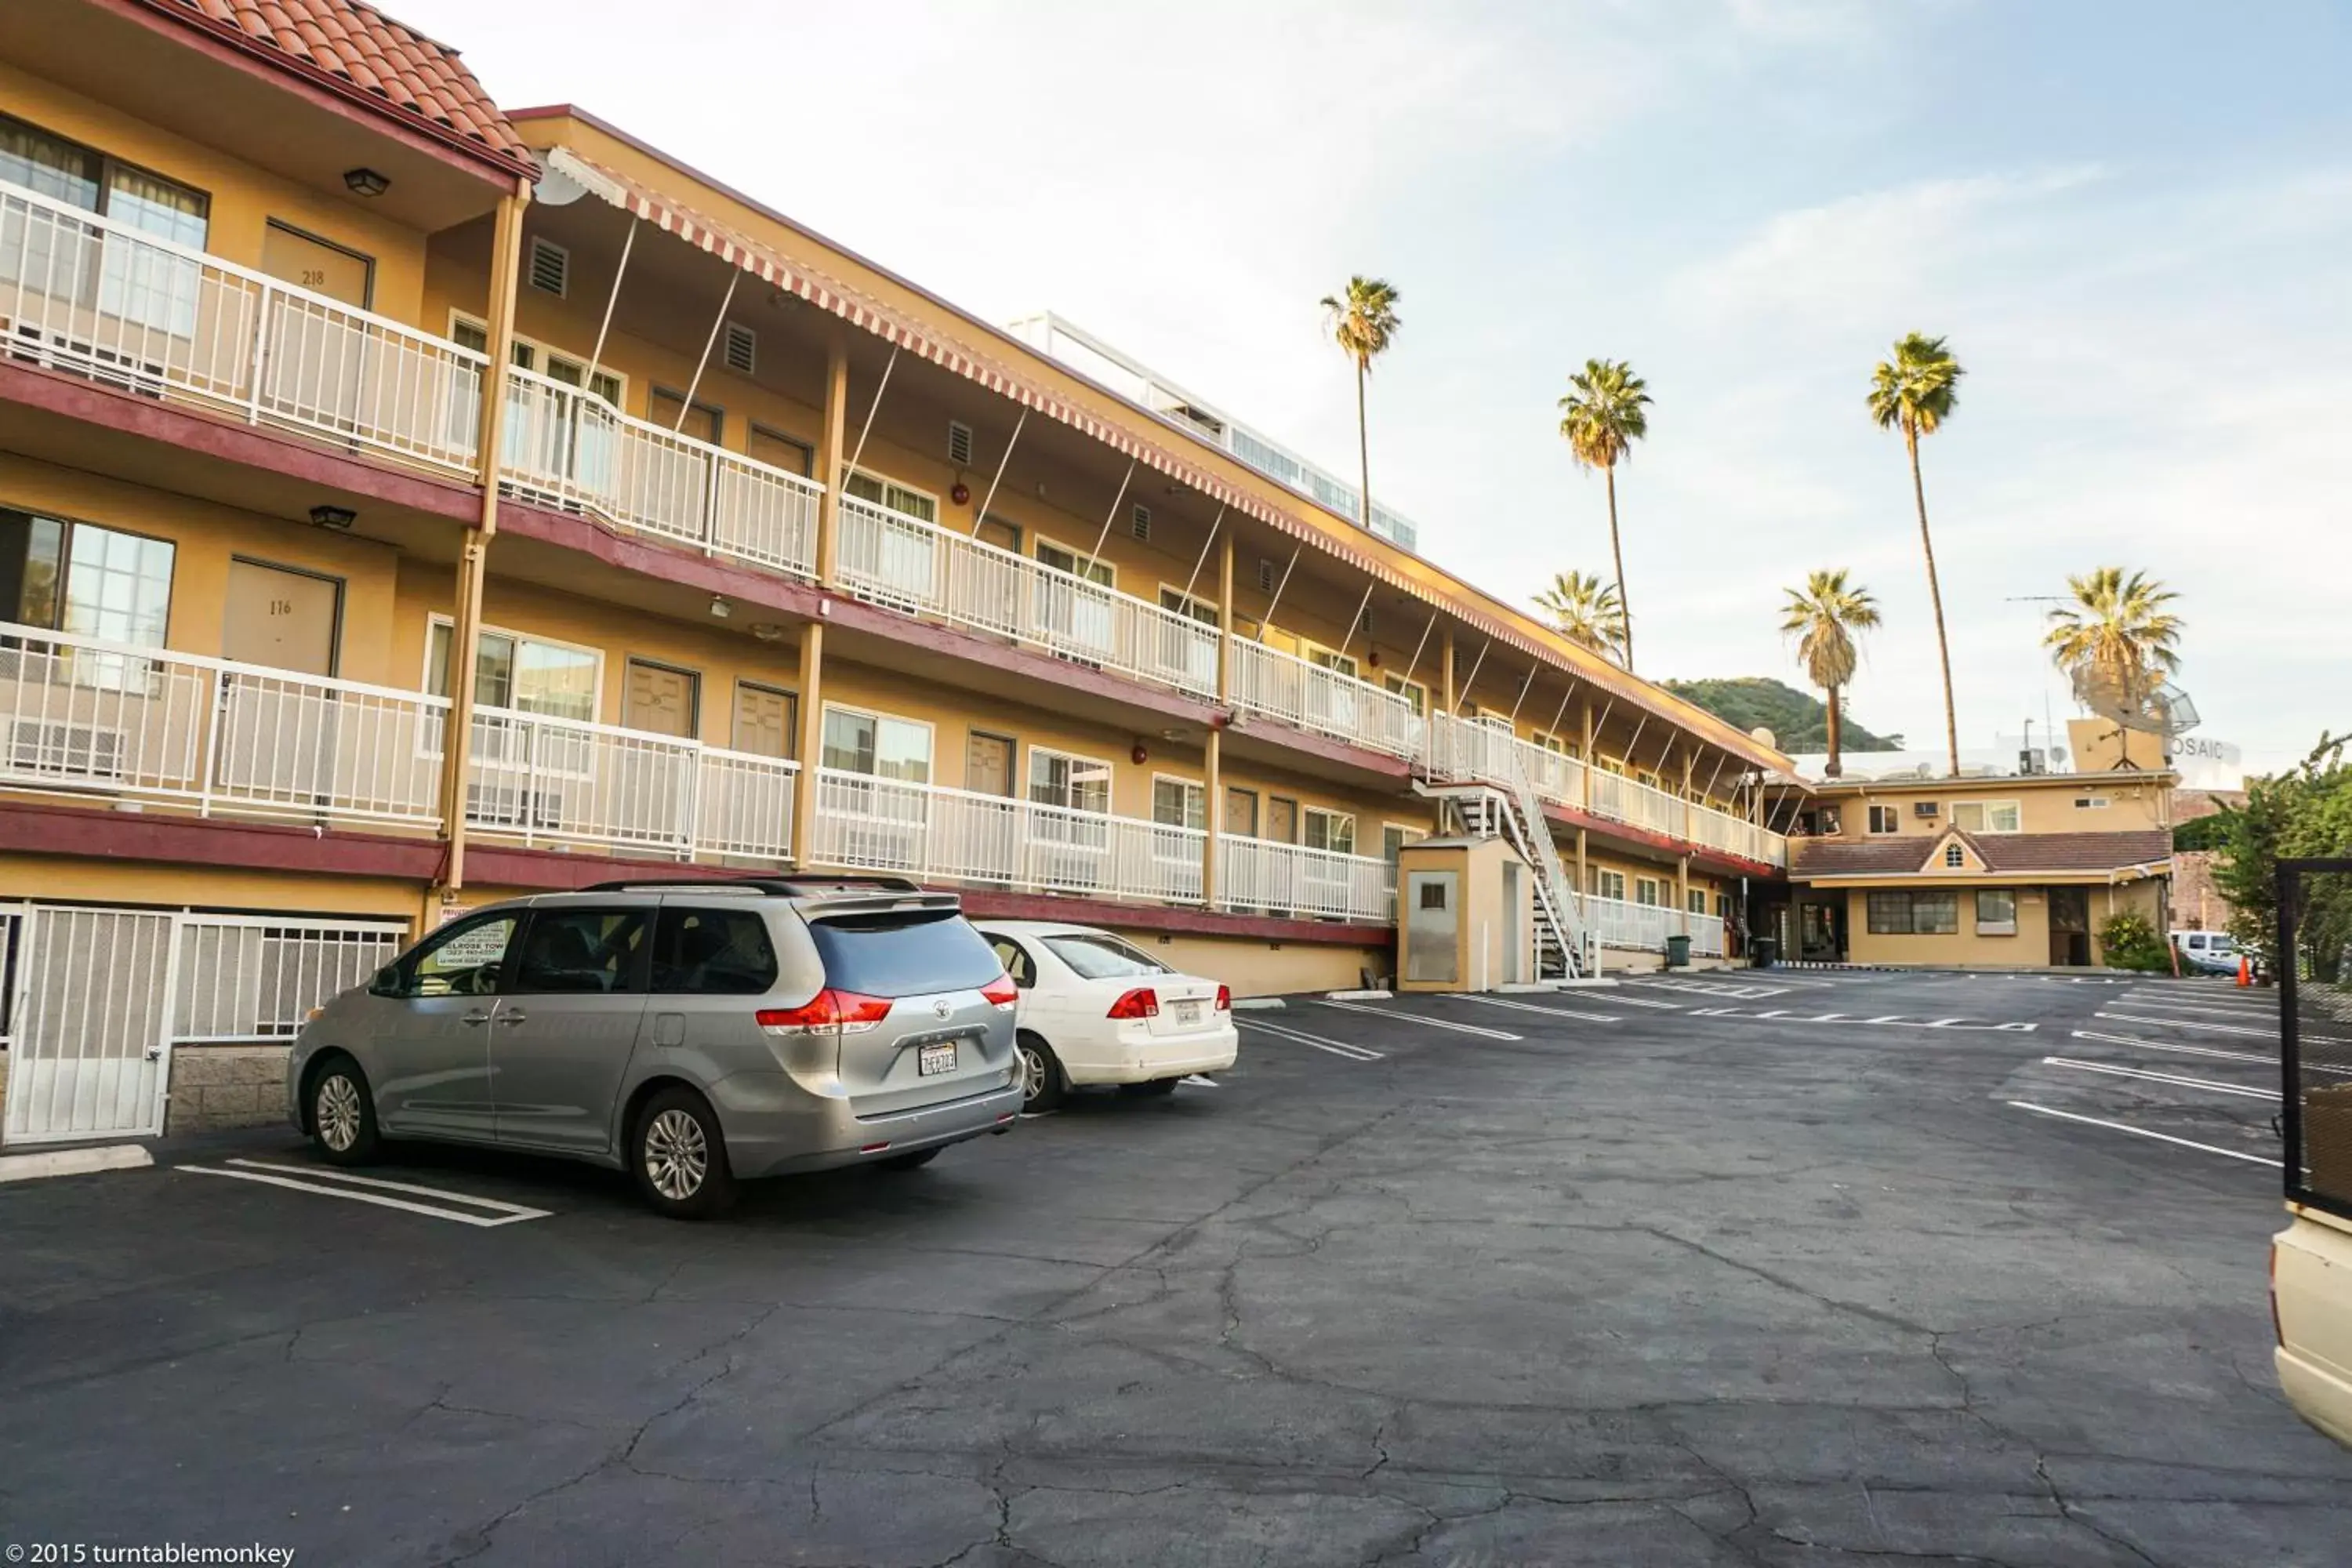 Area and facilities, Property Building in Hollywood La Brea Inn